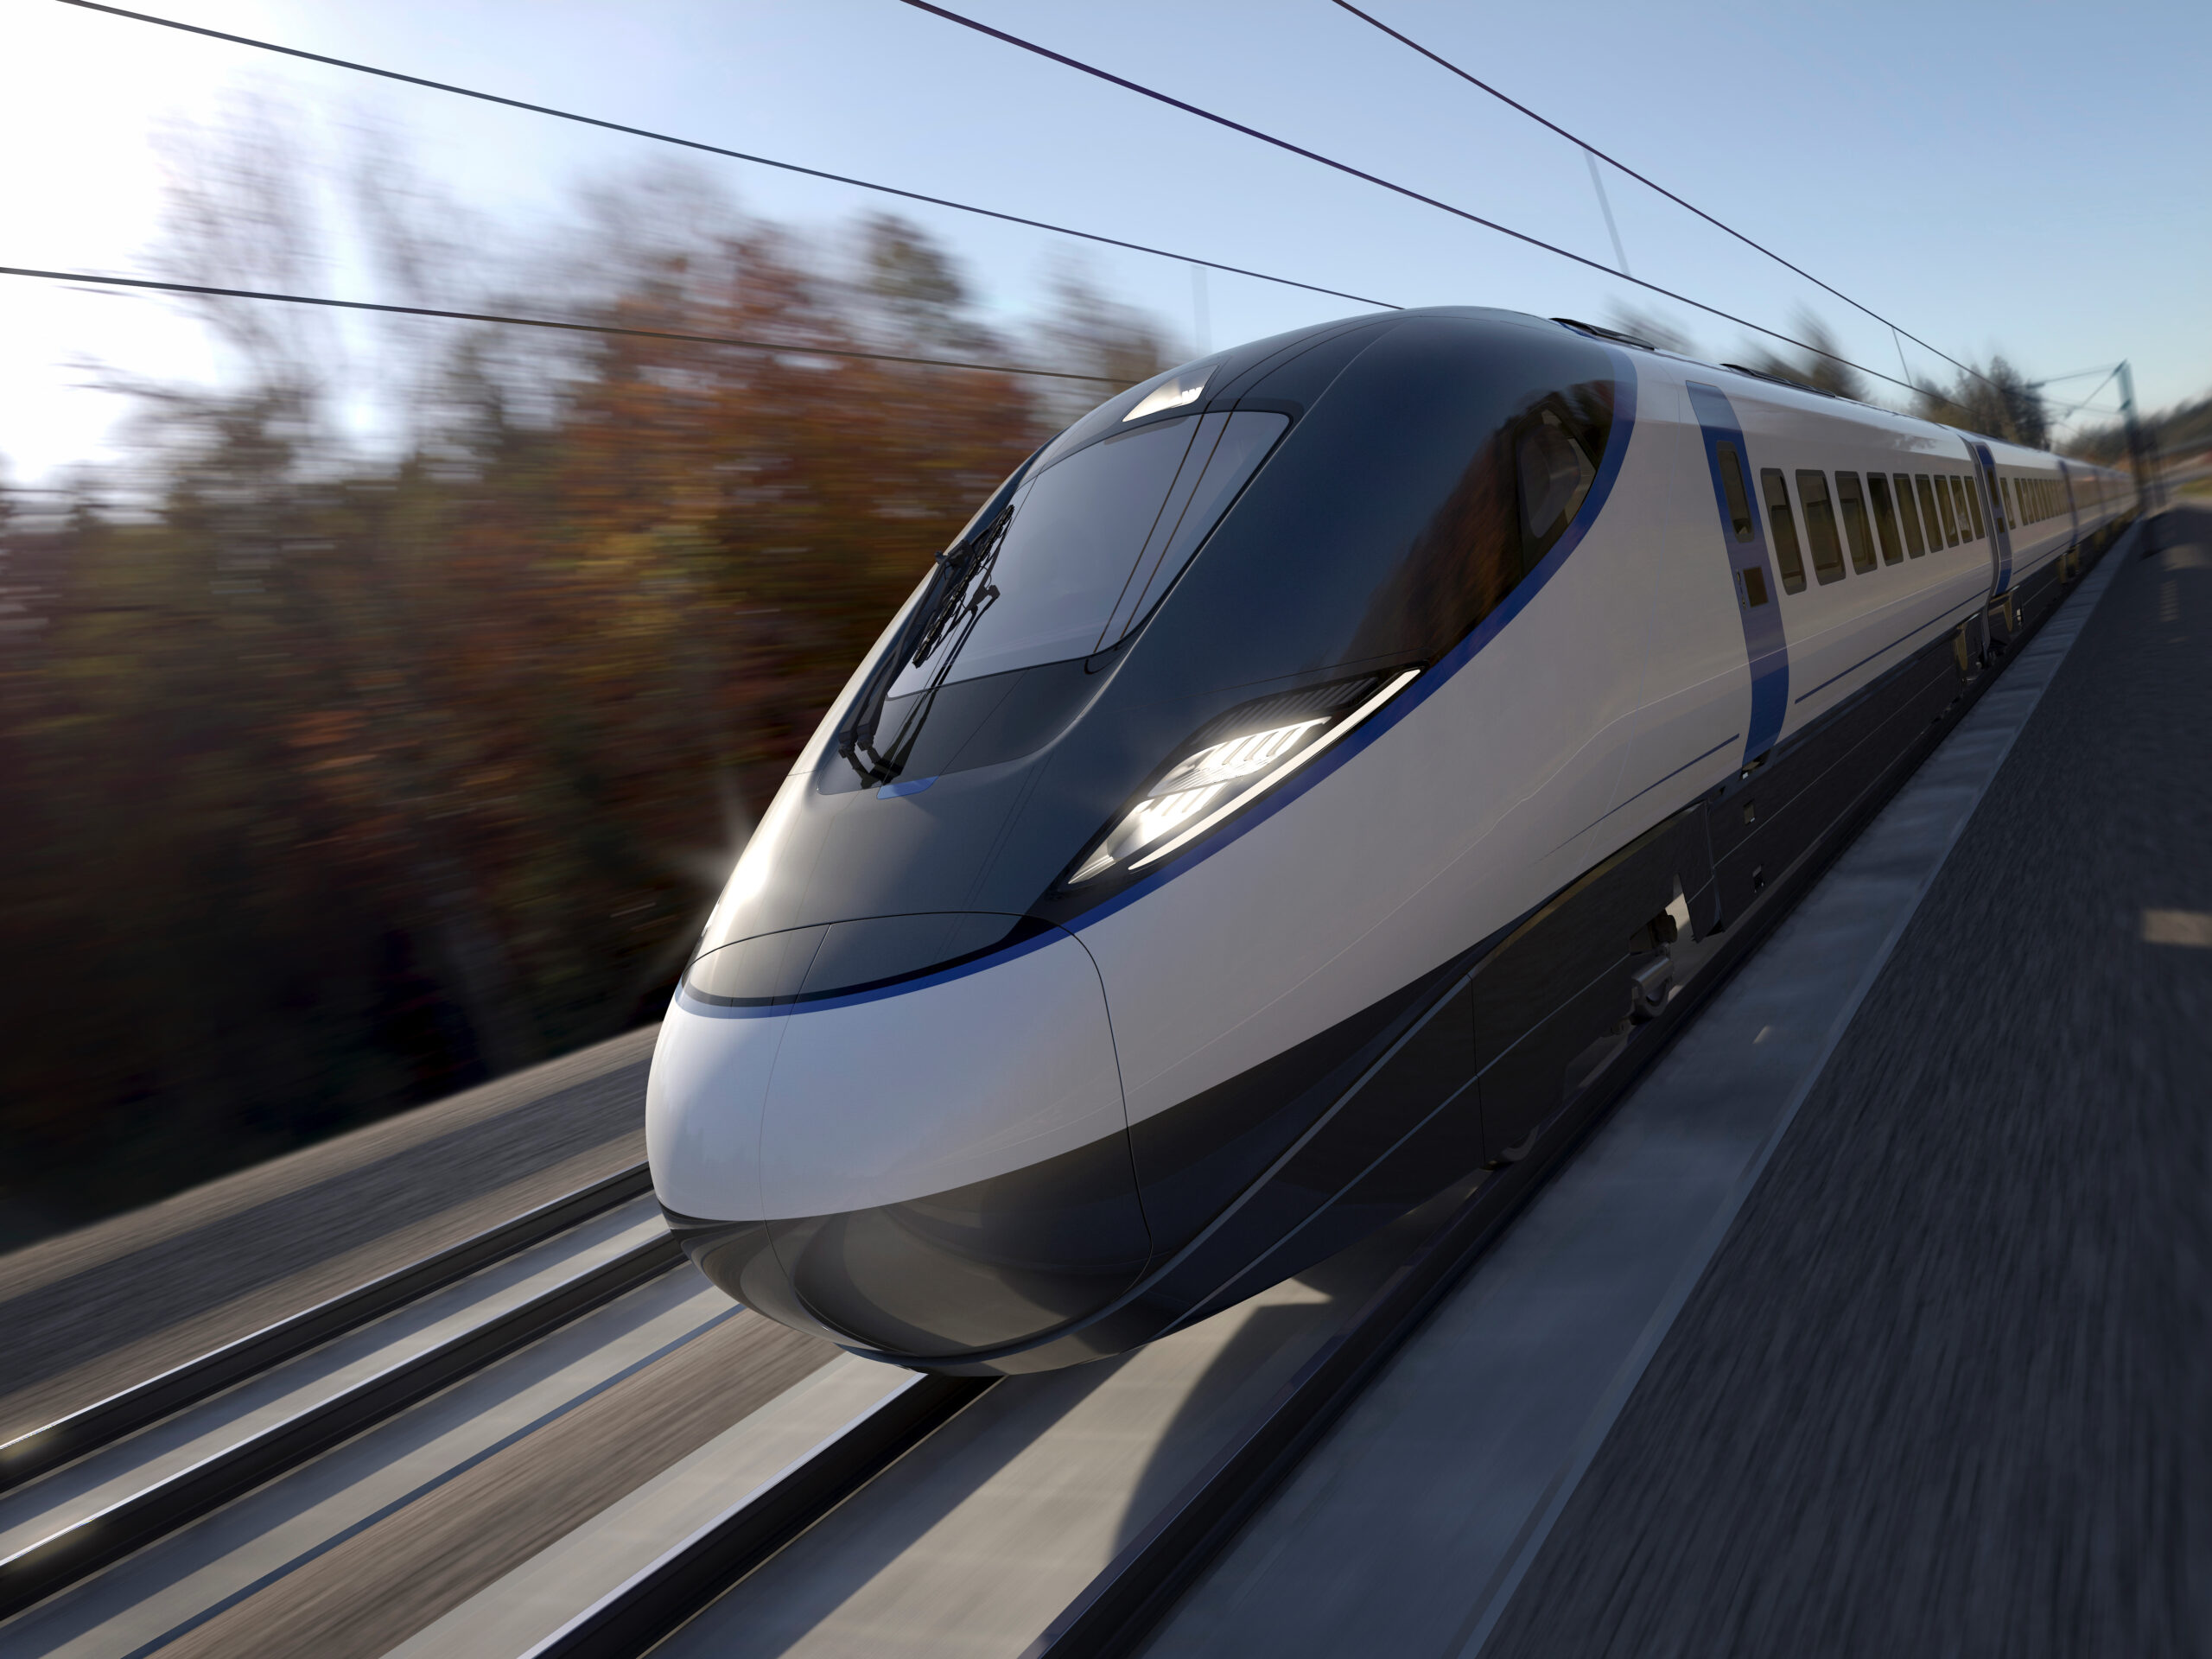 Rendering of an HS2 train to be built by the Alstom-Hitachi Rail JV HAH-S